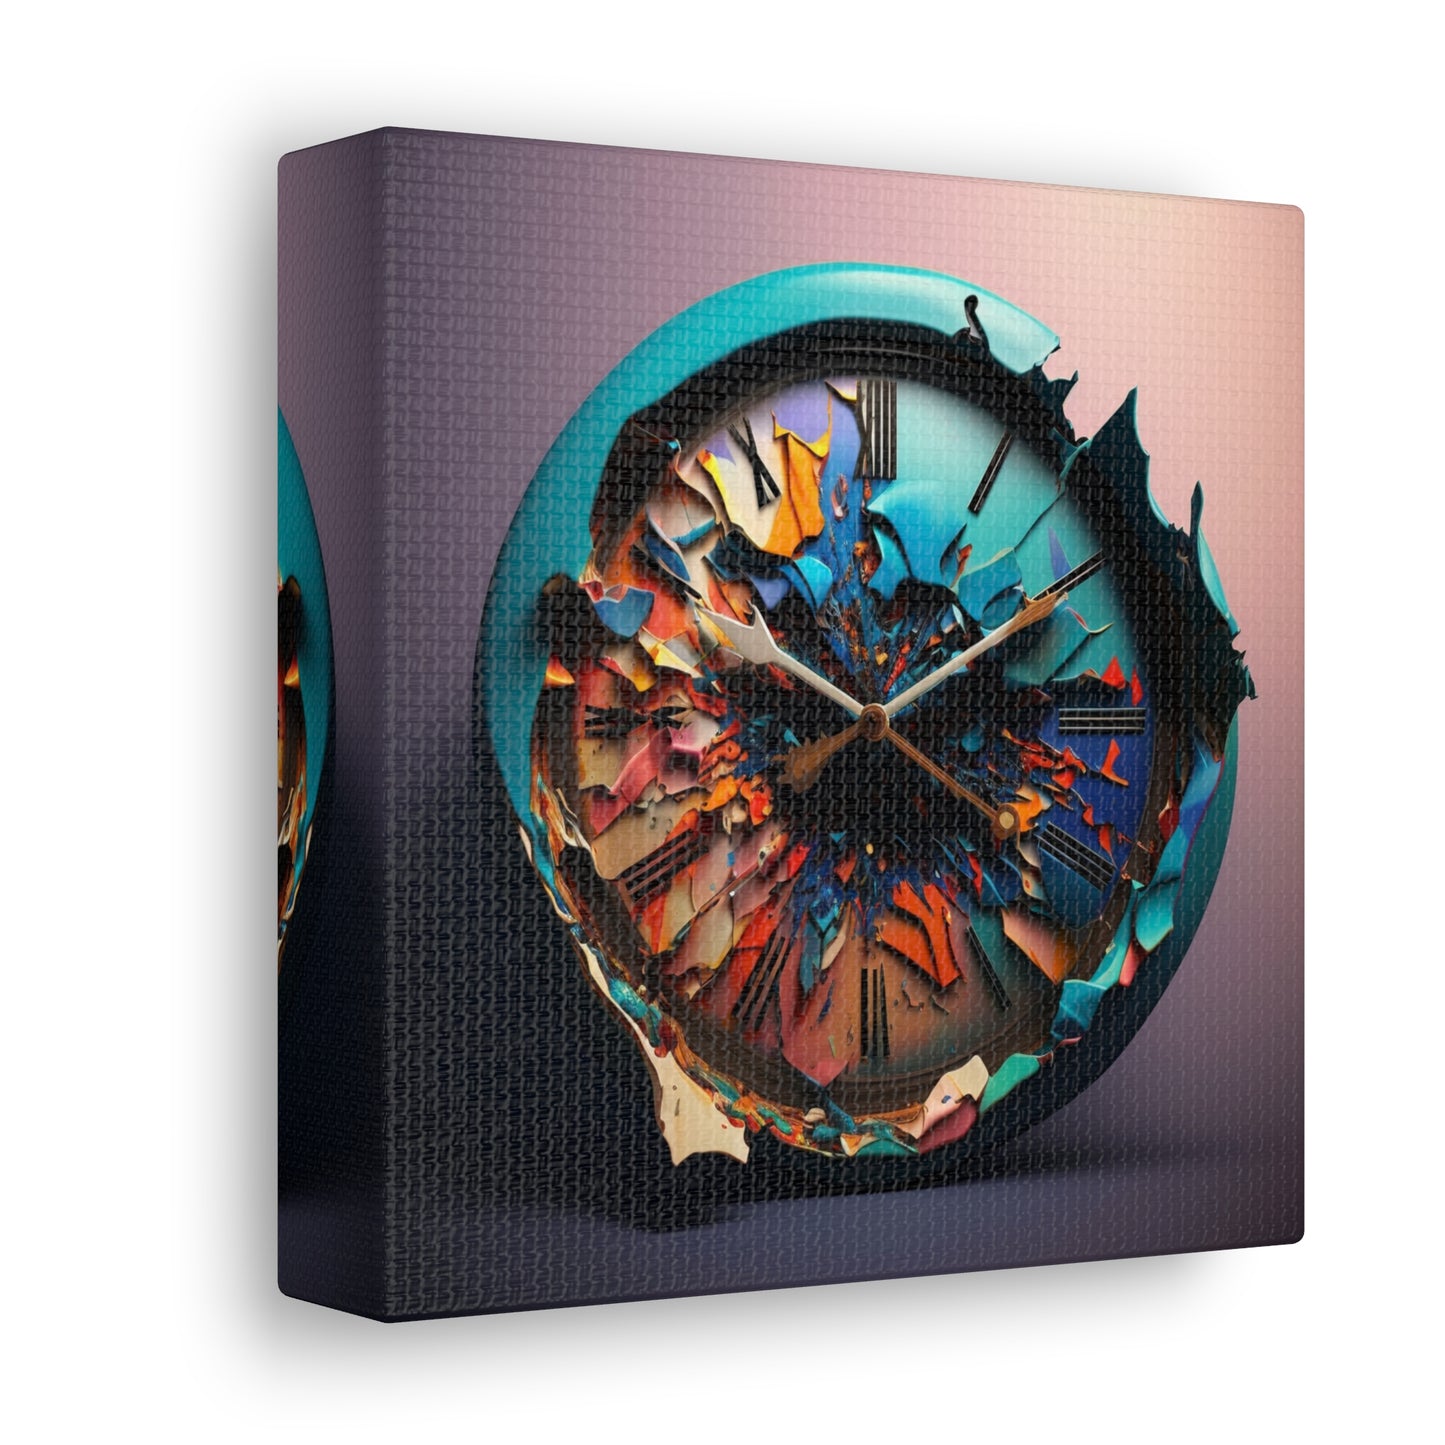 Abstract Color Clock 4